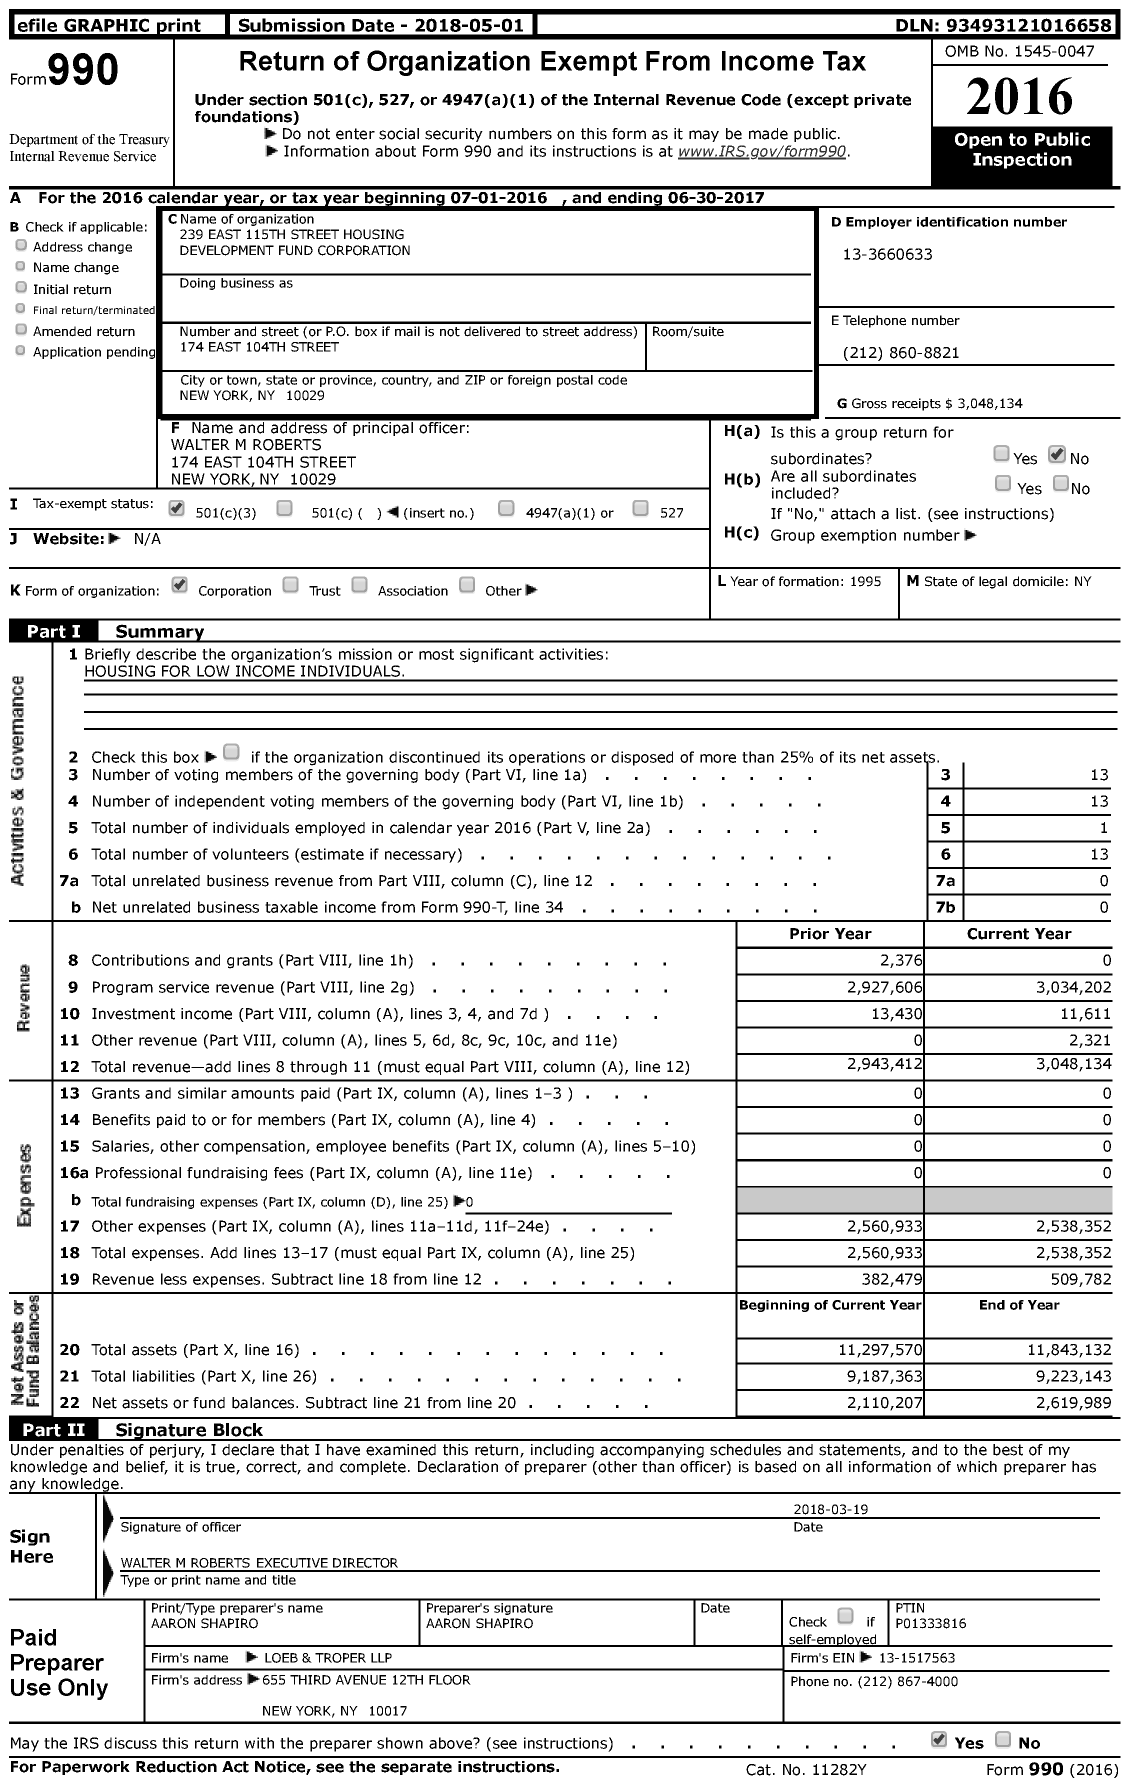 Image of first page of 2016 Form 990 for 239 East 115th Street Housing Development Fund Corporation